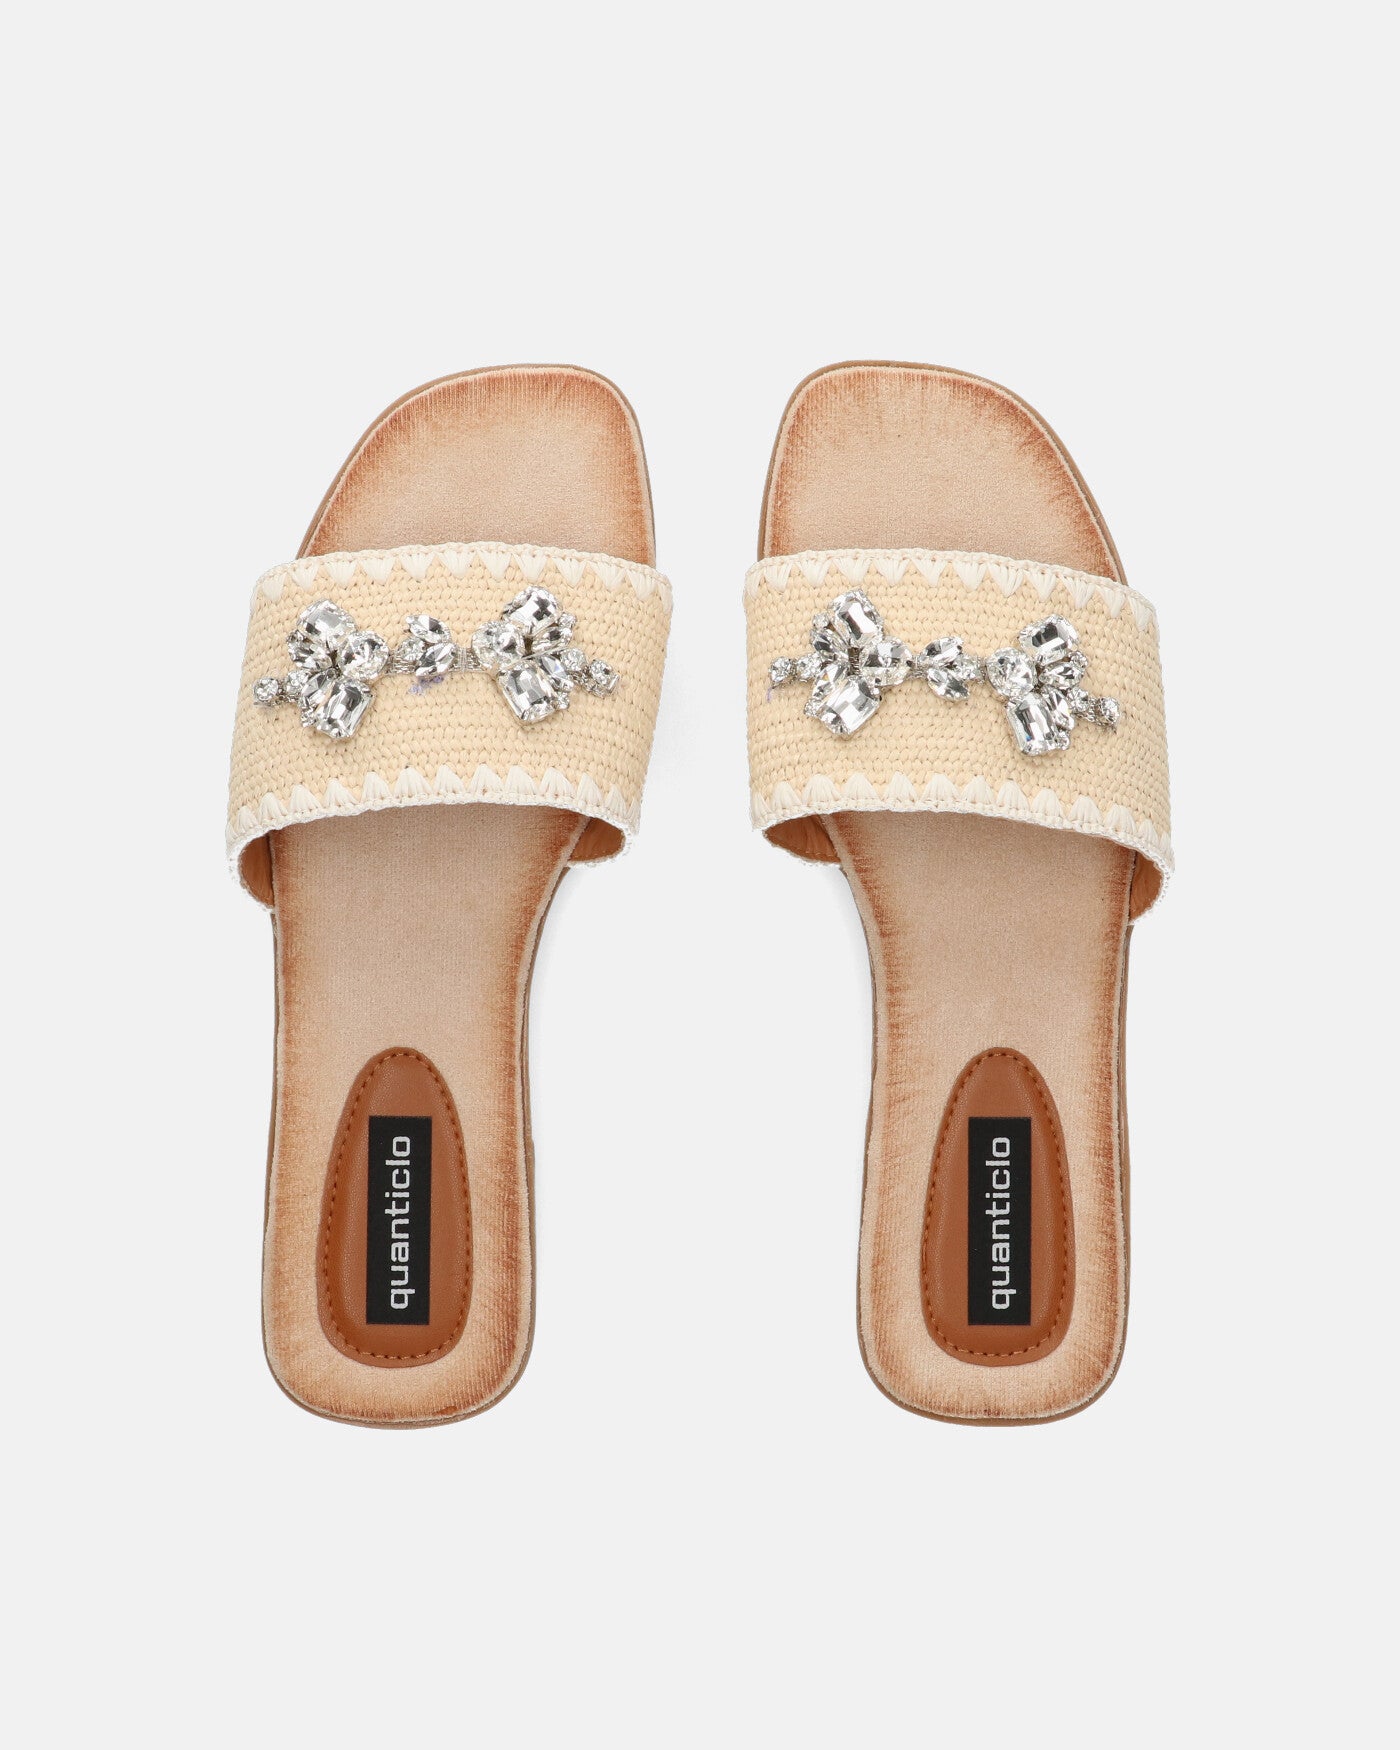 ROZENN - beige slippers with embroidered band and gems